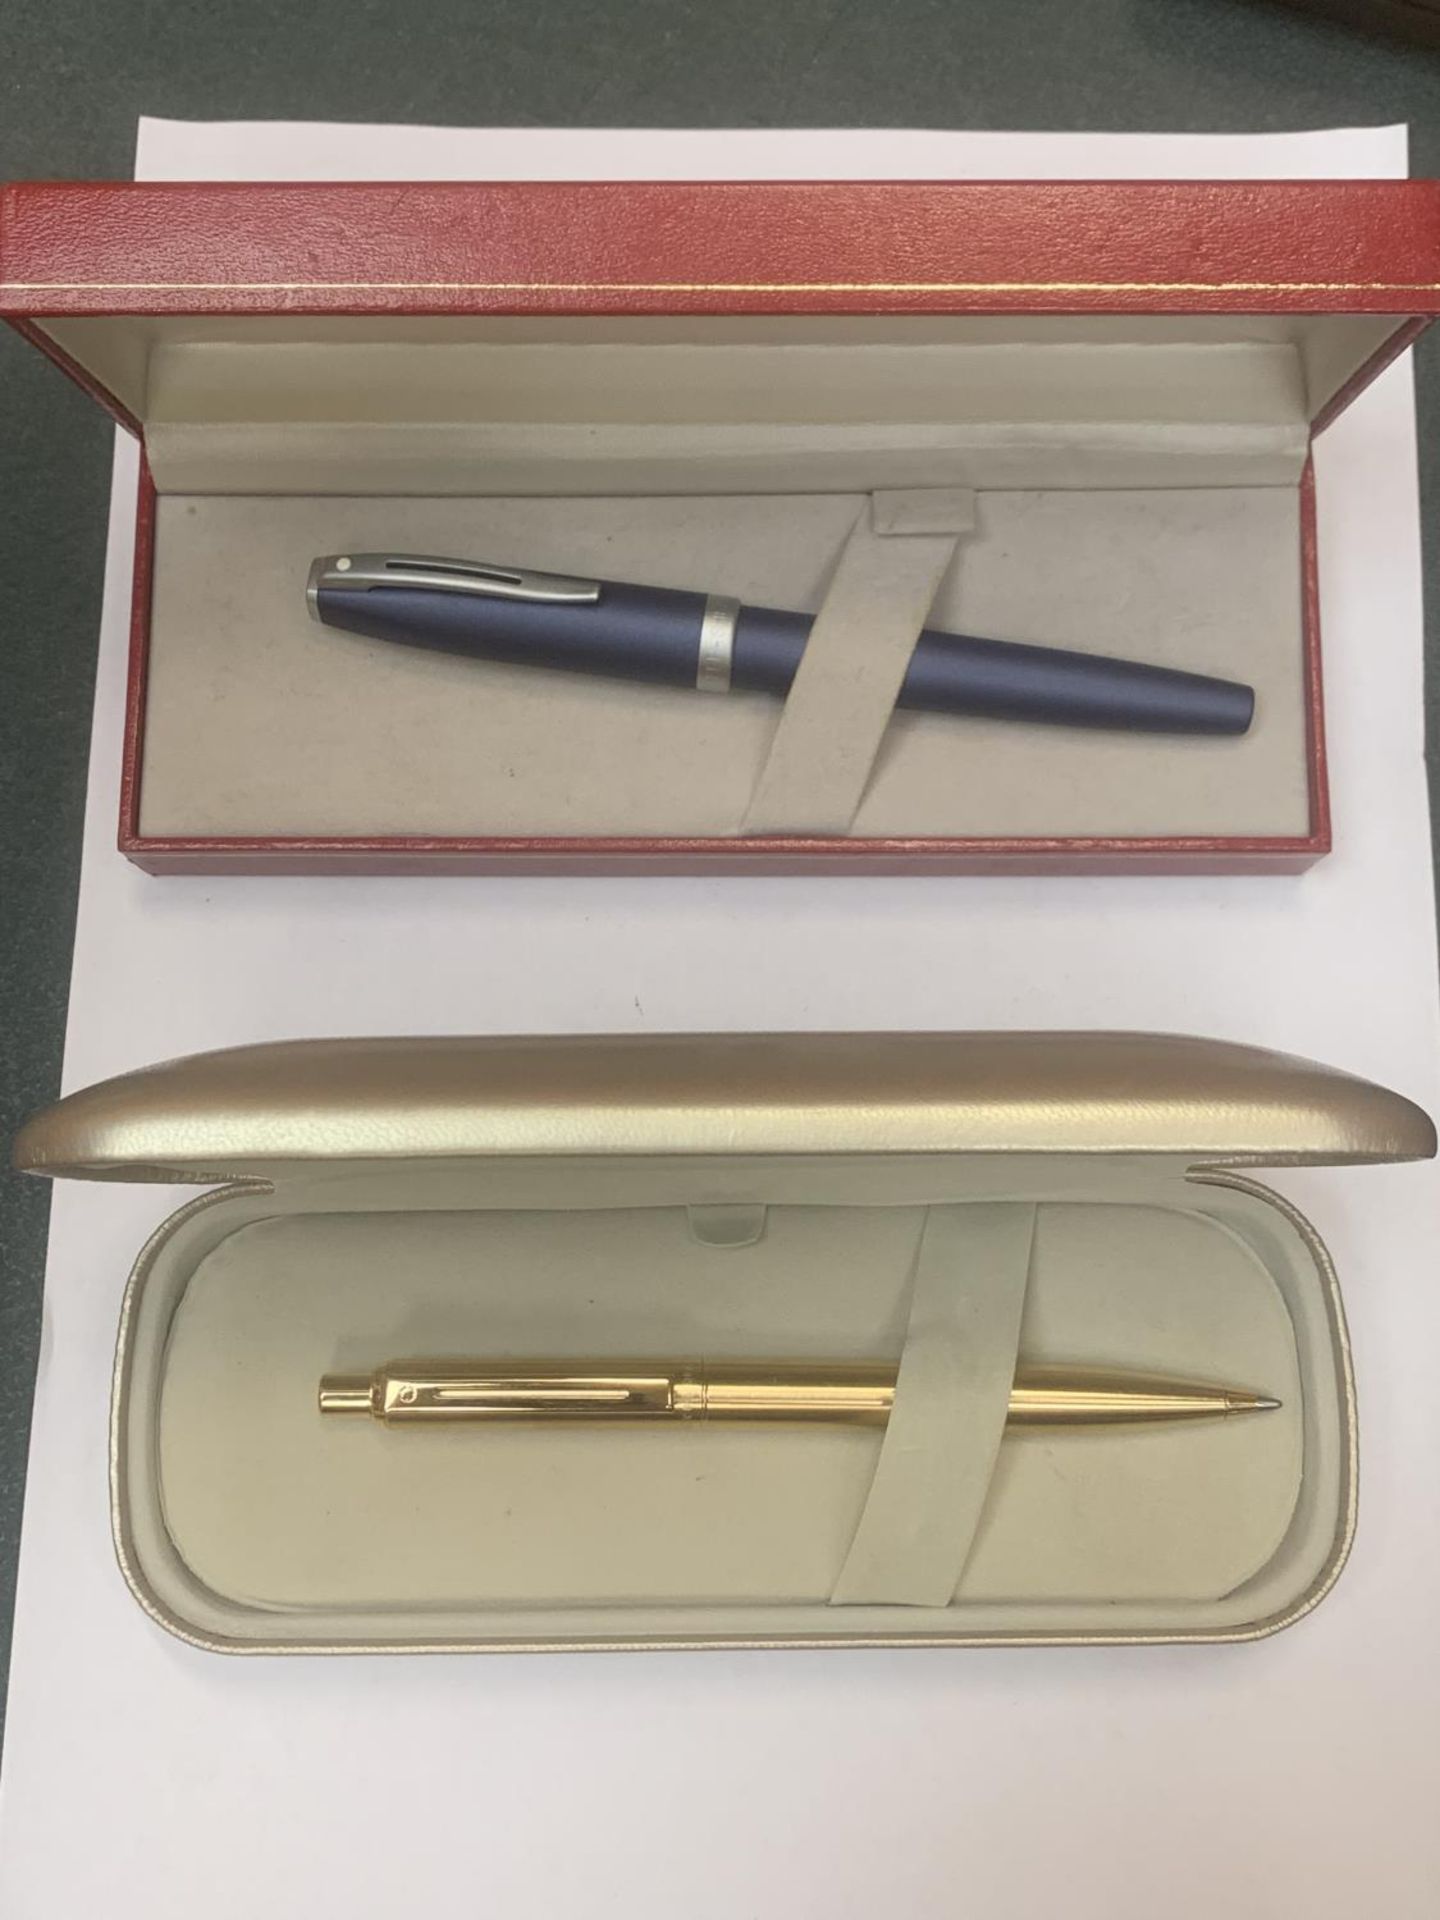 TWO BOXED SHEAFFER BIROS